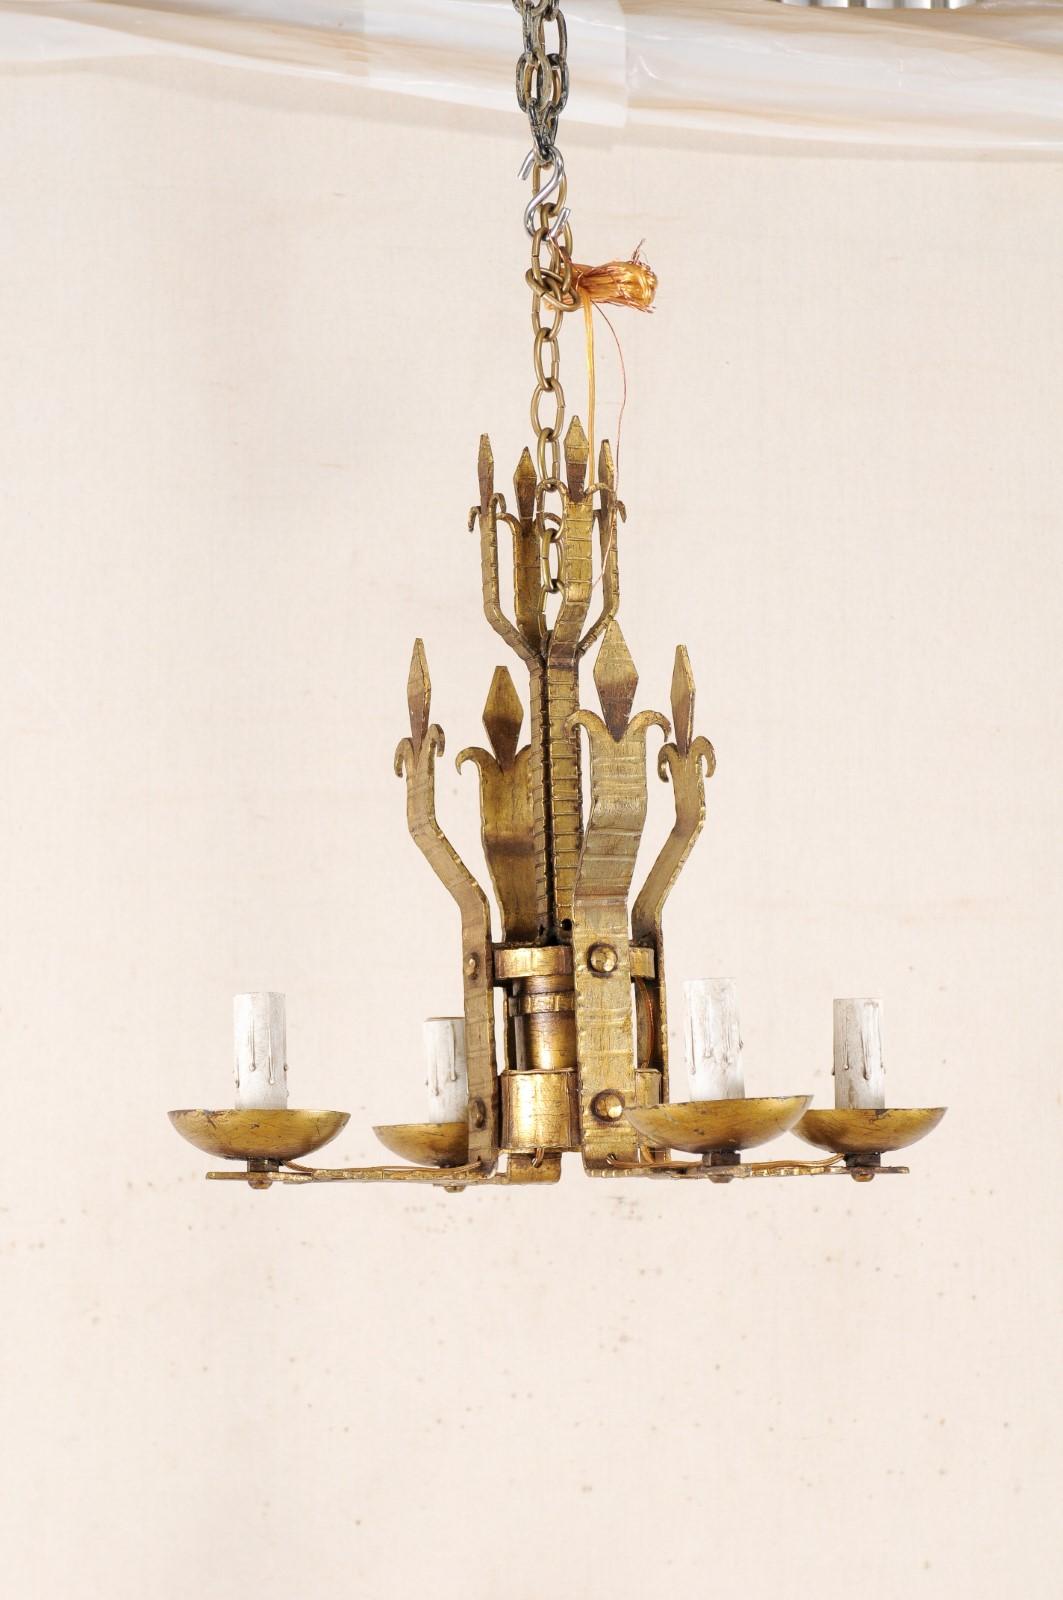 A French four-light gold colored iron chandelier from the mid-20th century. This vintage light fixture from France features a stylized Fleur de Lys body with four arms extending straight out from bottom, each supporting a cupped iron bobèche and